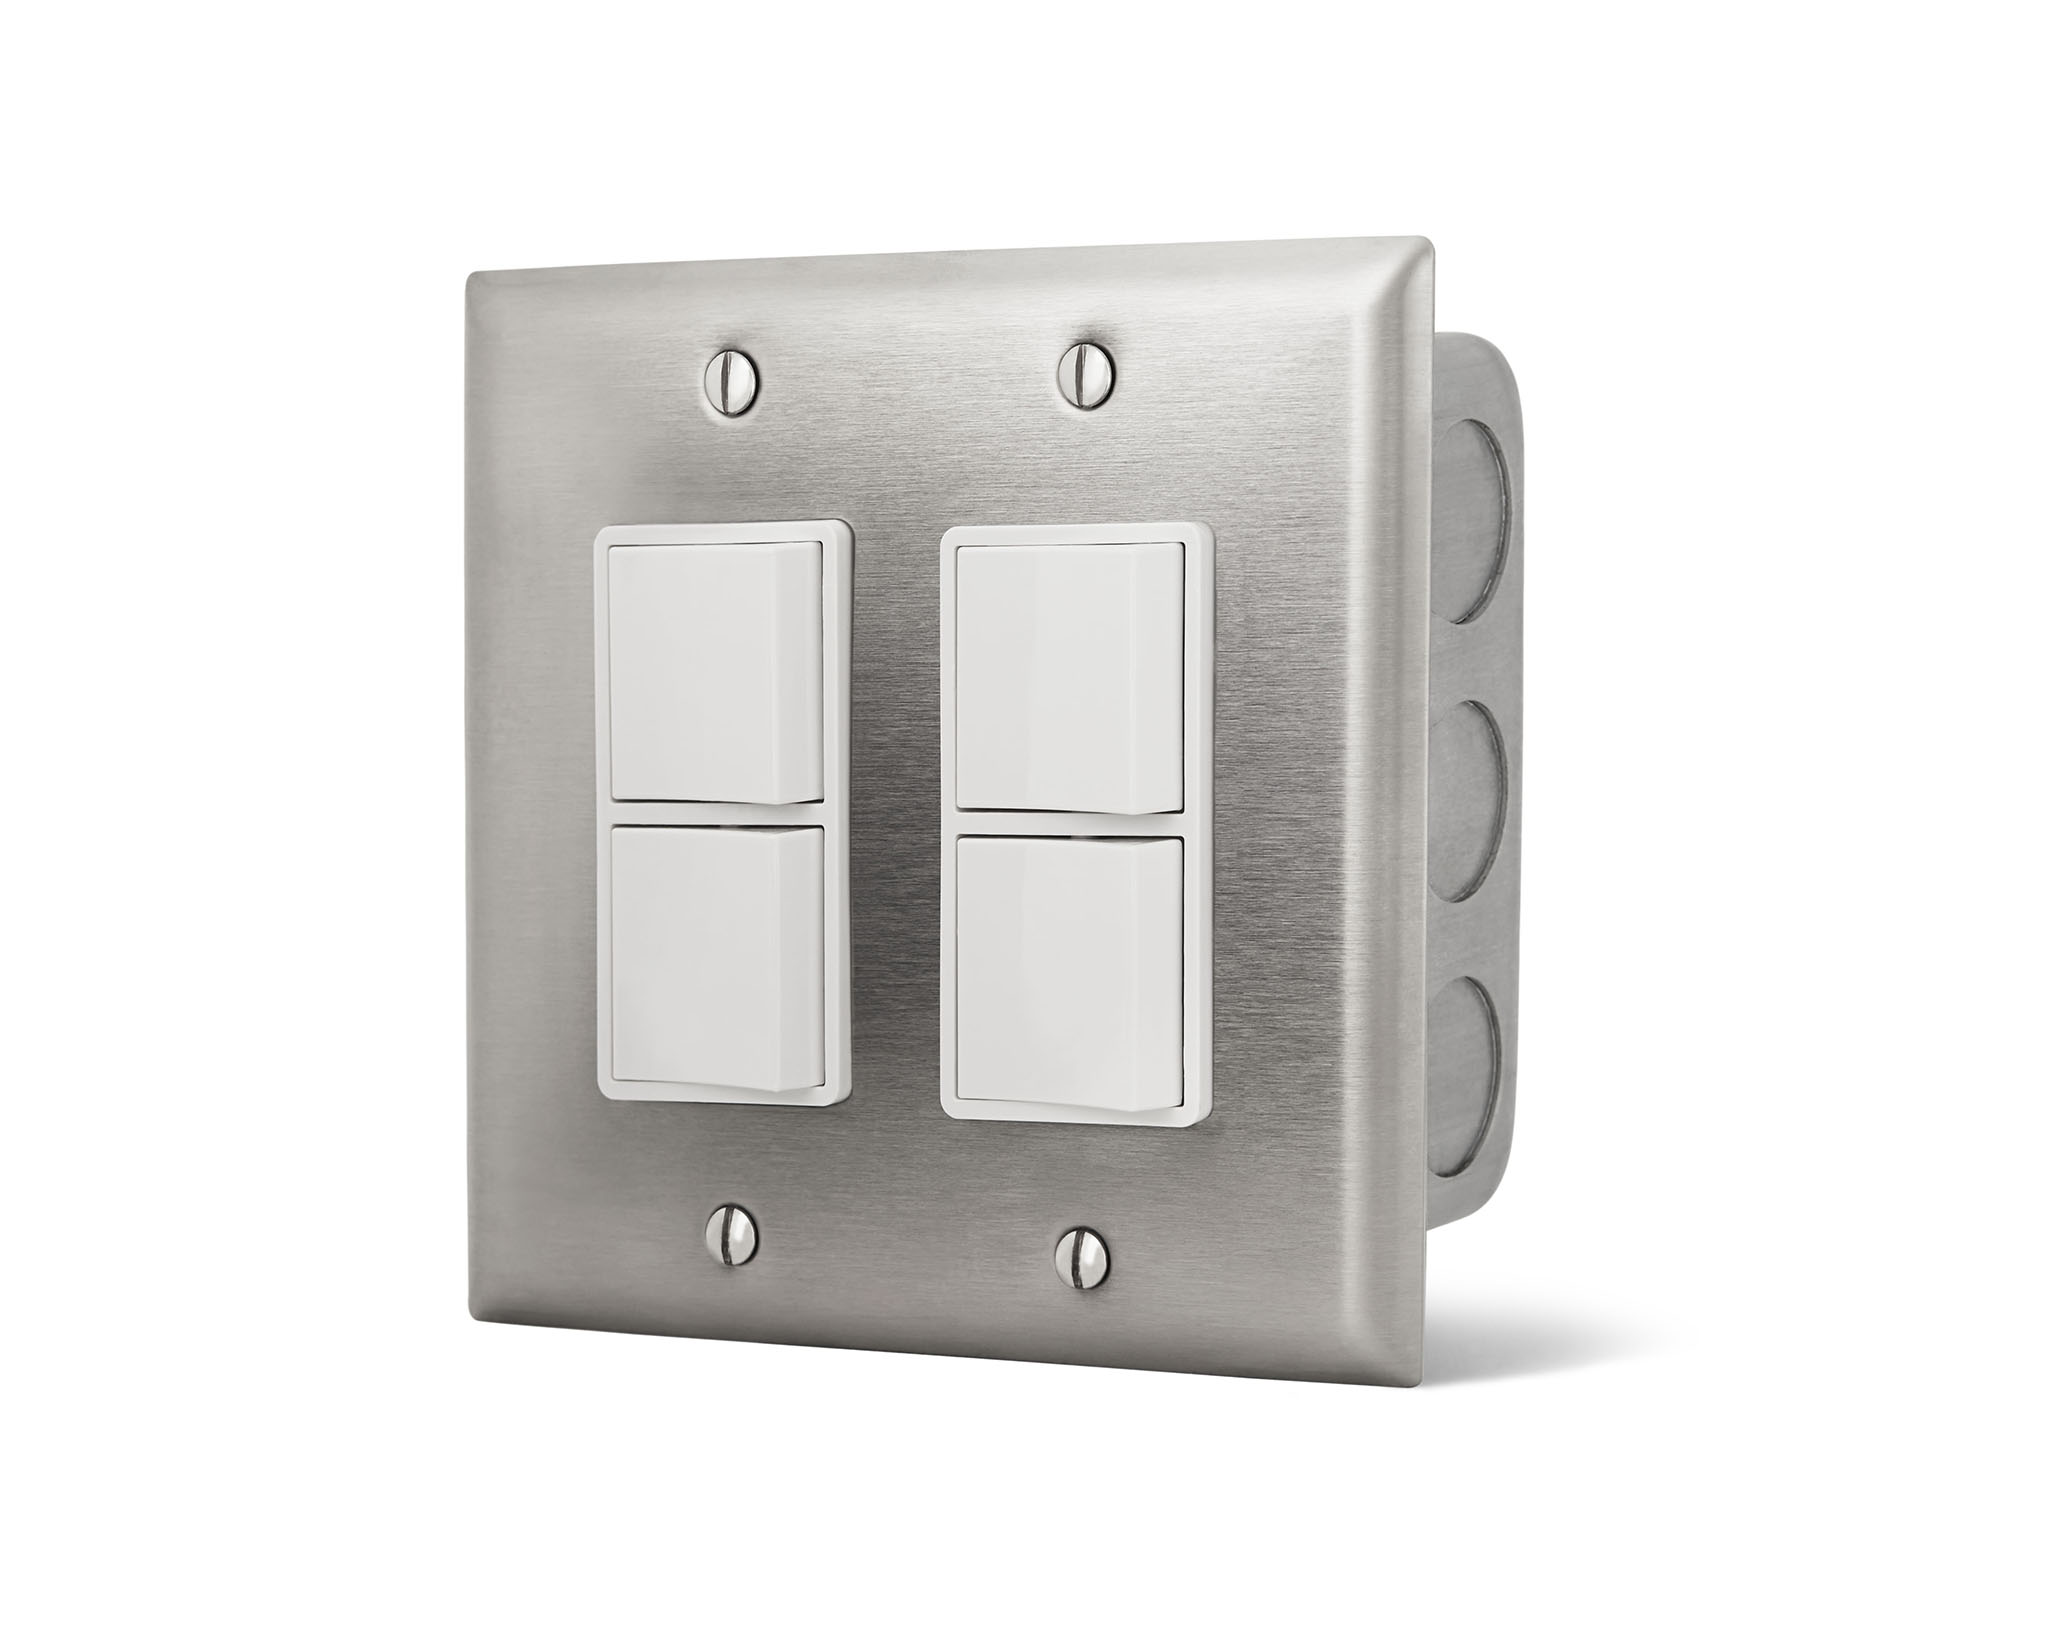 Infratech 14-4305 Dual Stainless Steel Wall Plate with Gang Box